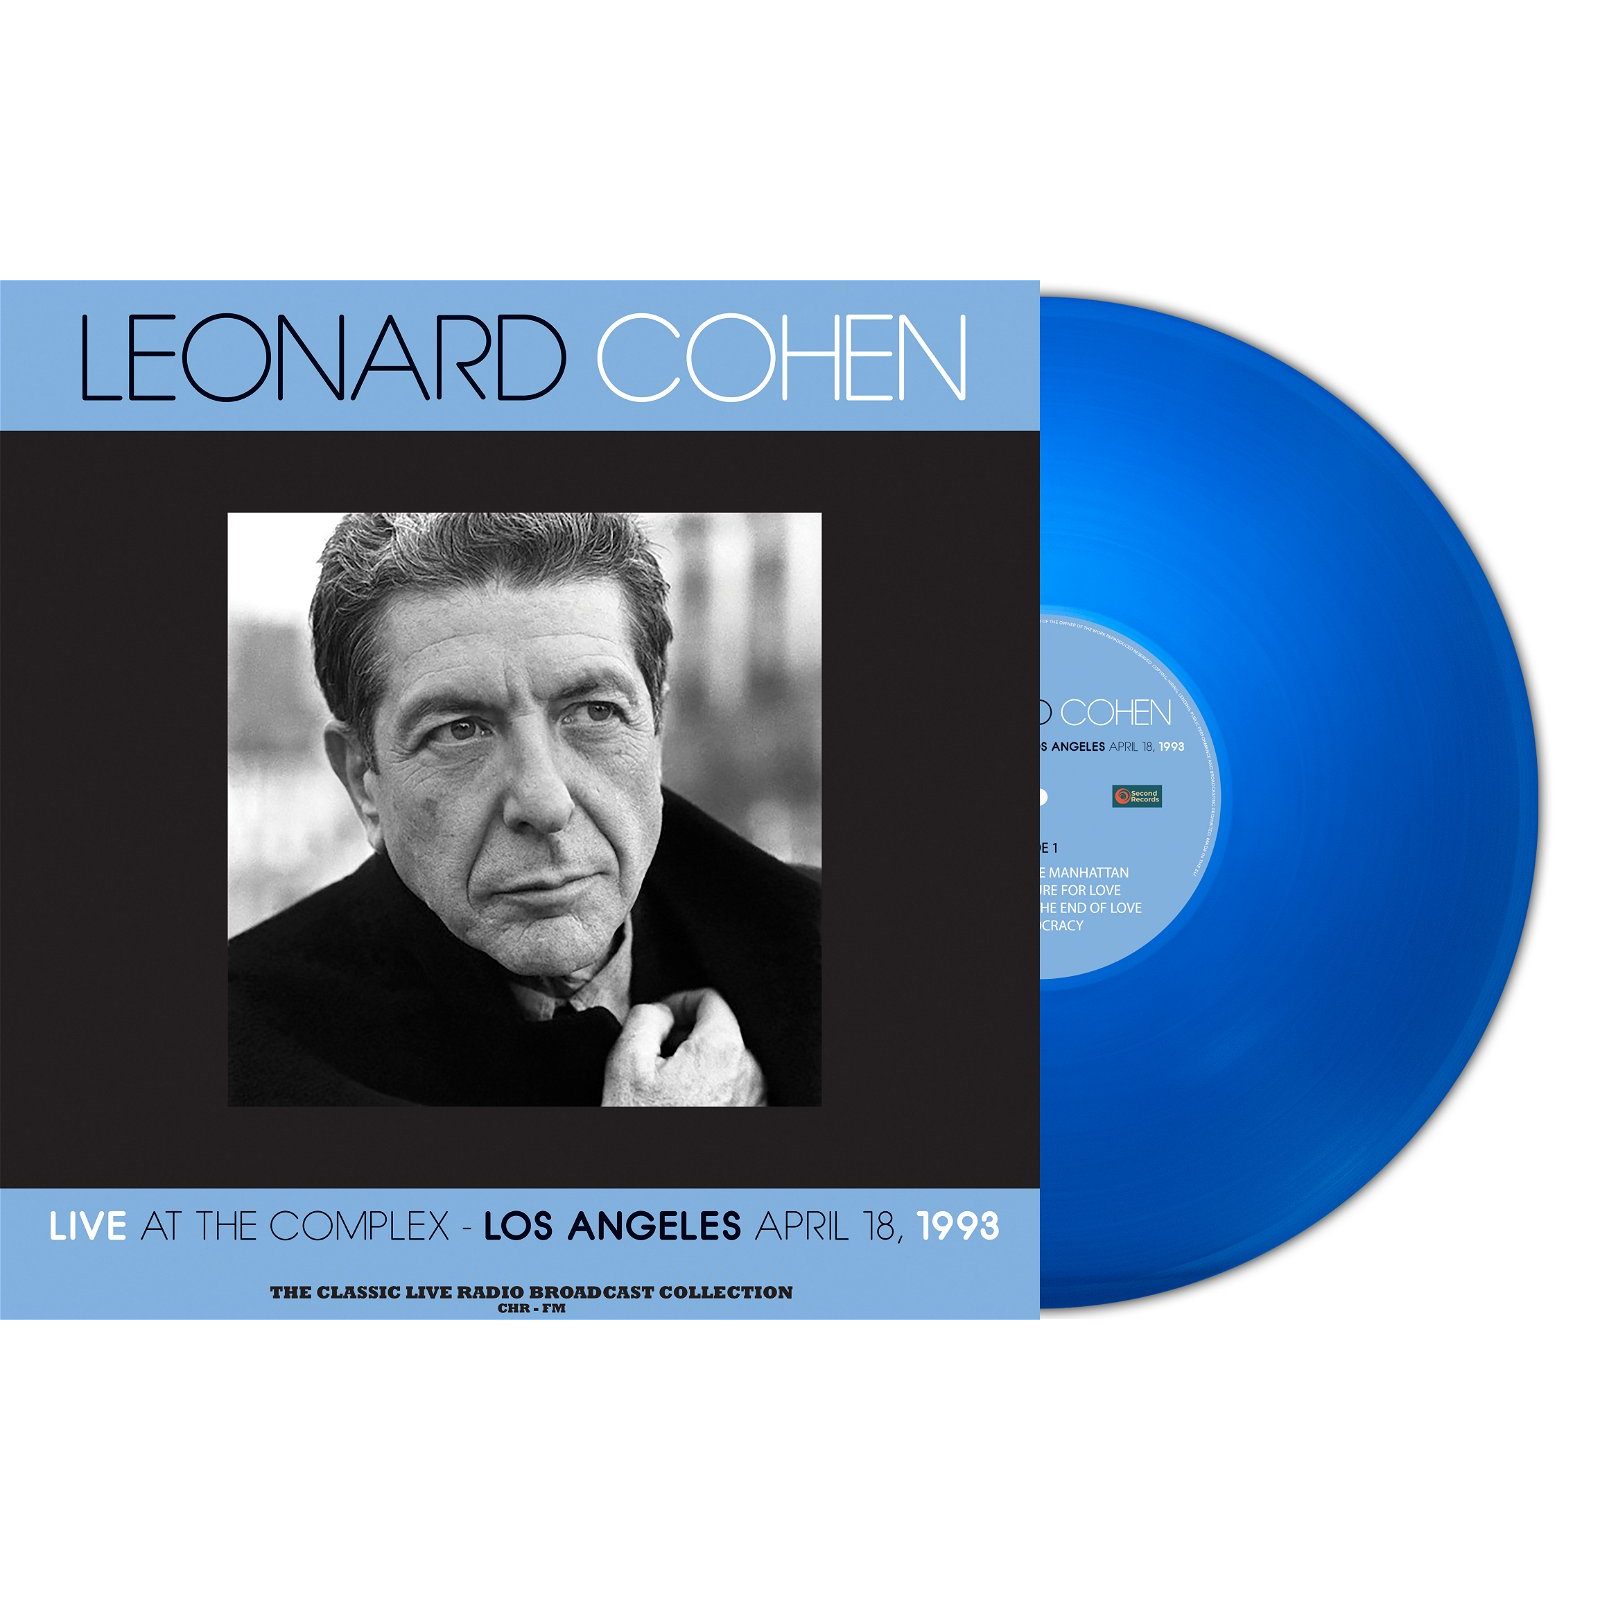 LIVE AT THE COMPLEX IN LOS ANGELES 18TH APRIL 1993 (COLOURED VINYL)